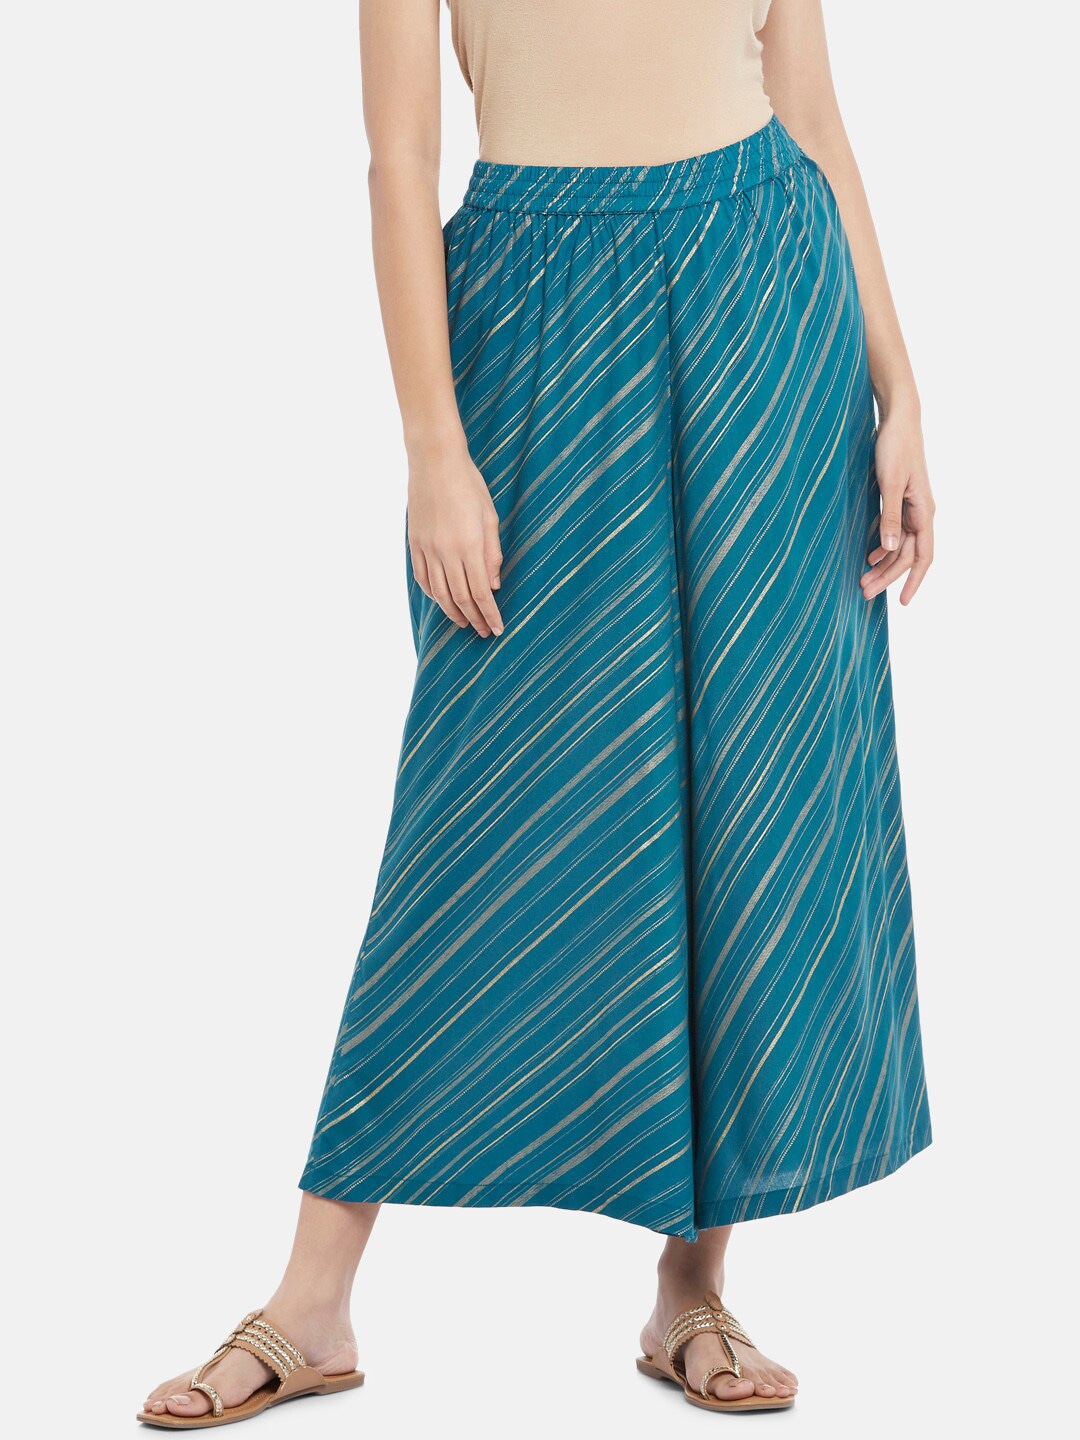 RANGMANCH BY PANTALOONS Women Teal Blue & Gold-Toned Striped Ethnic Palazzos Price in India